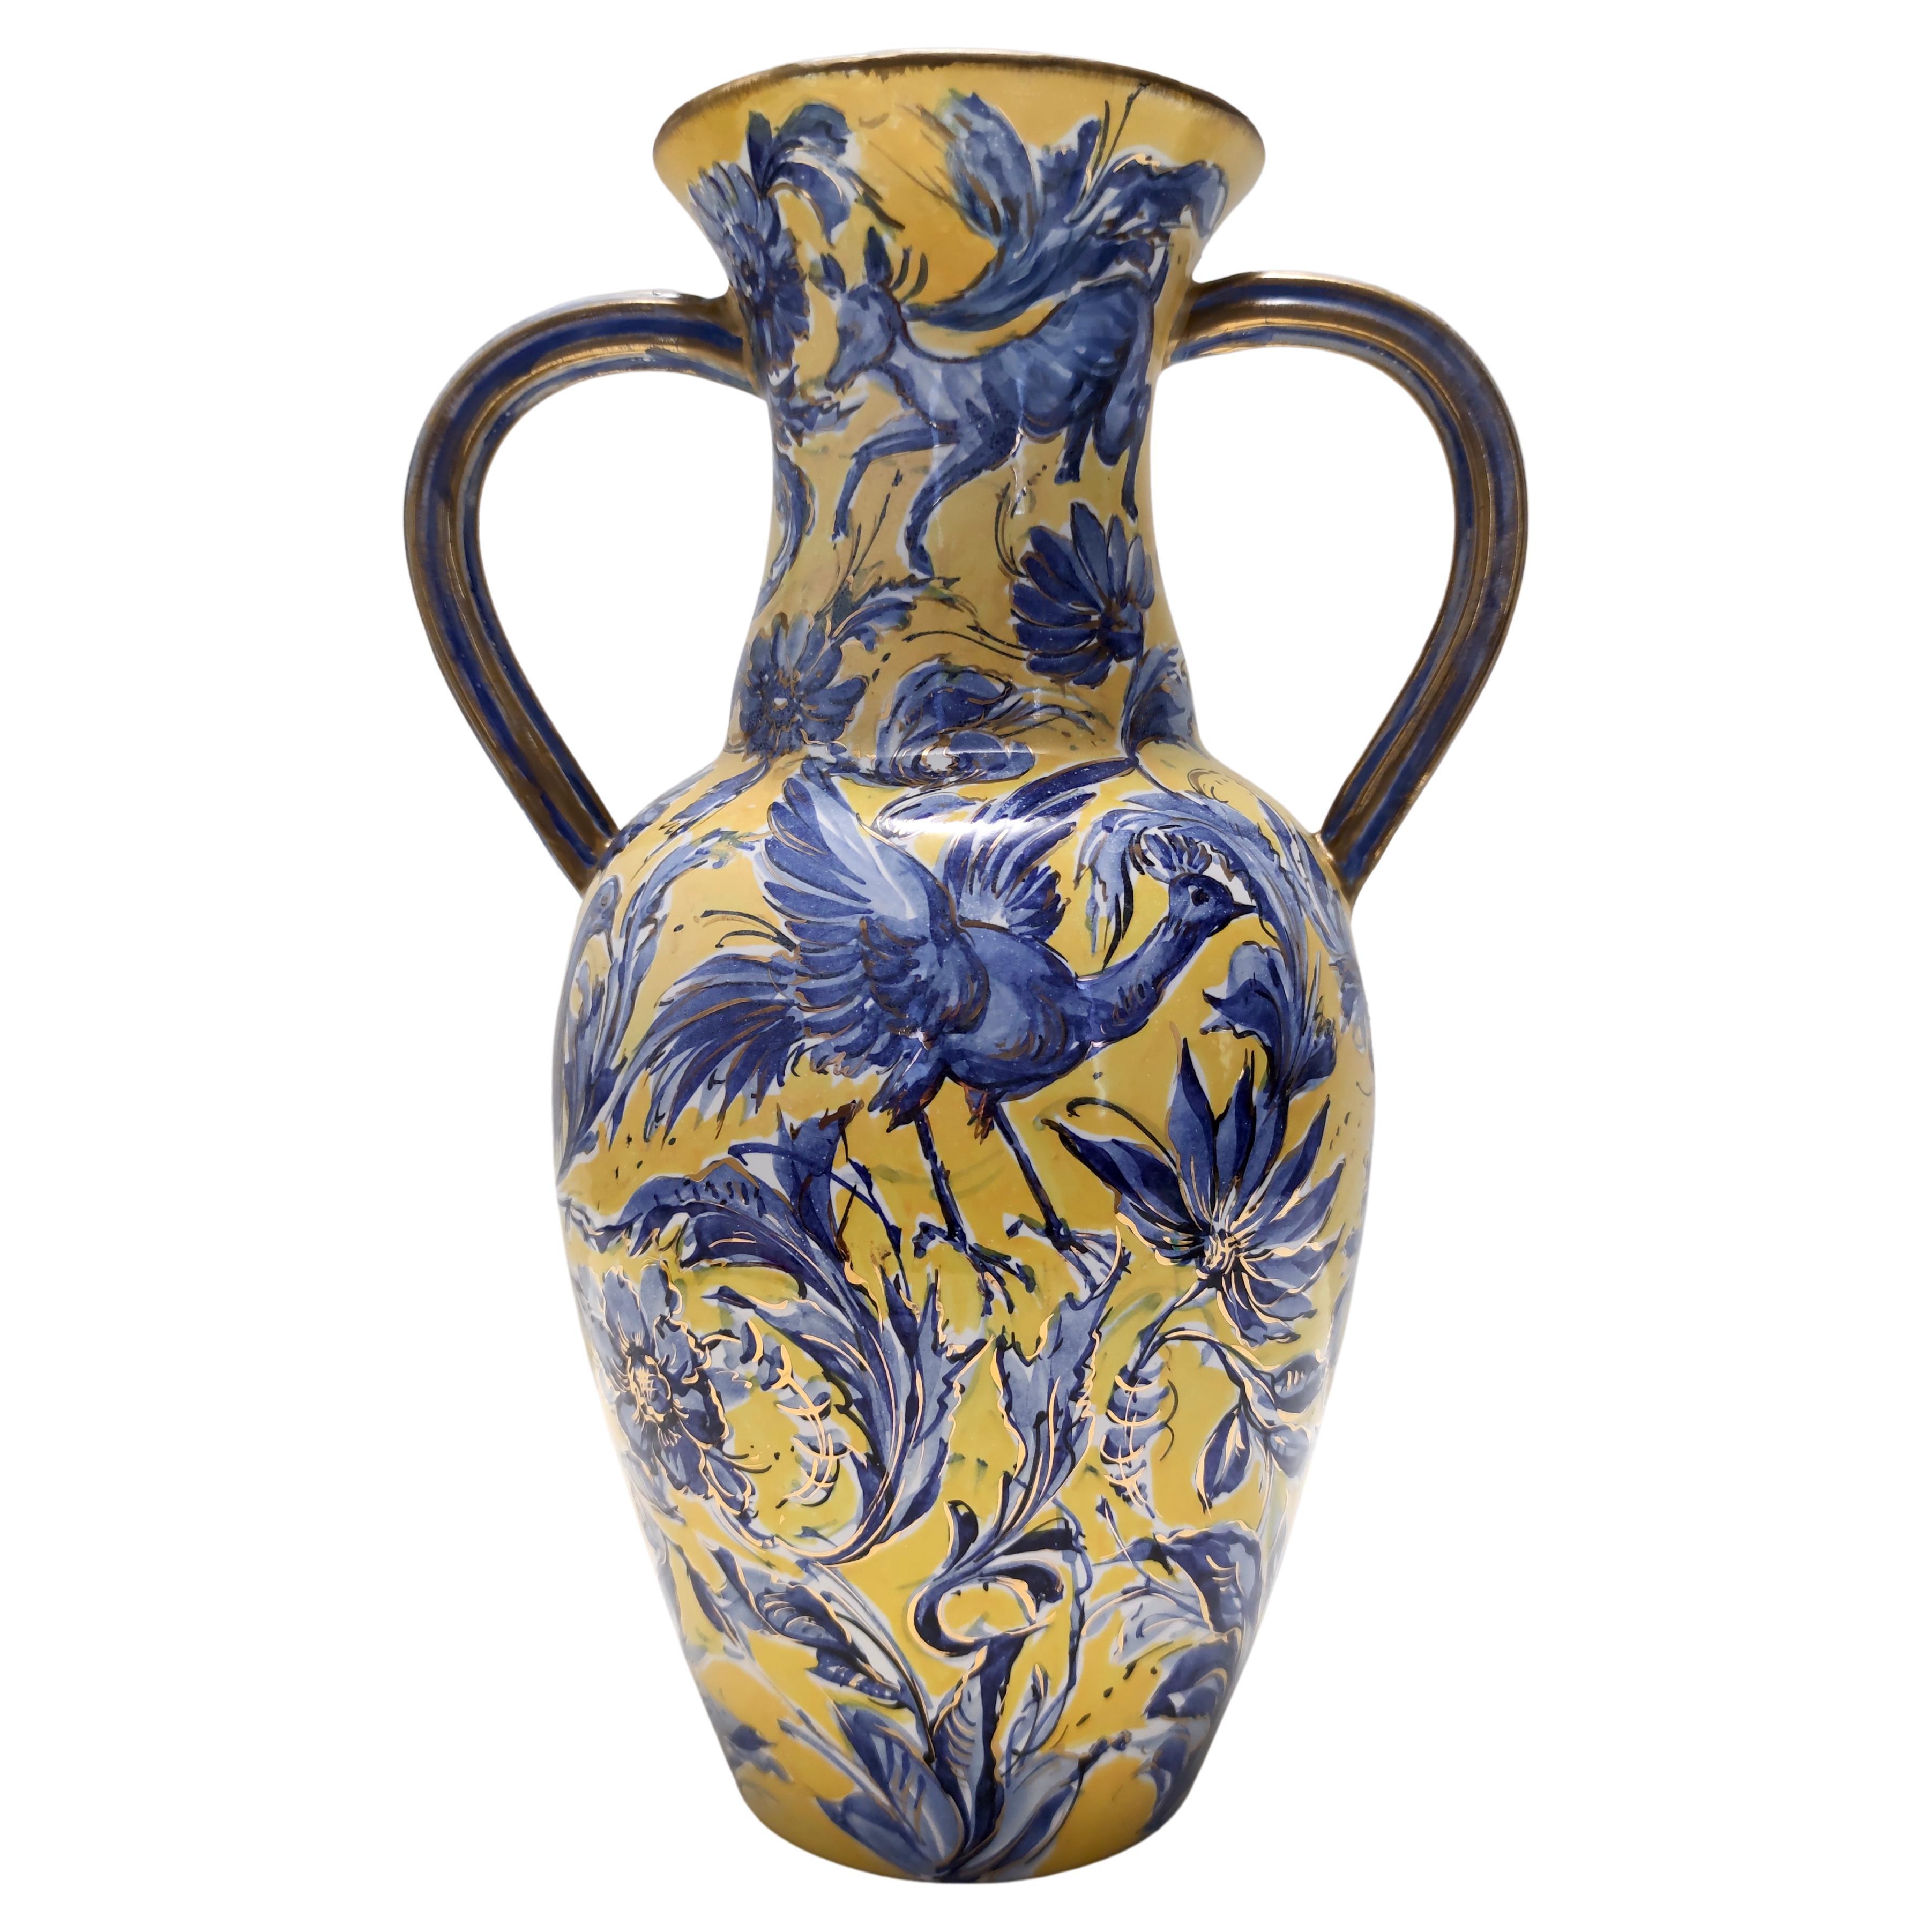 Vintage Handmade Yellow and Blue Glazed Ceramic Amphora by Zulimo Aretini, Italy For Sale